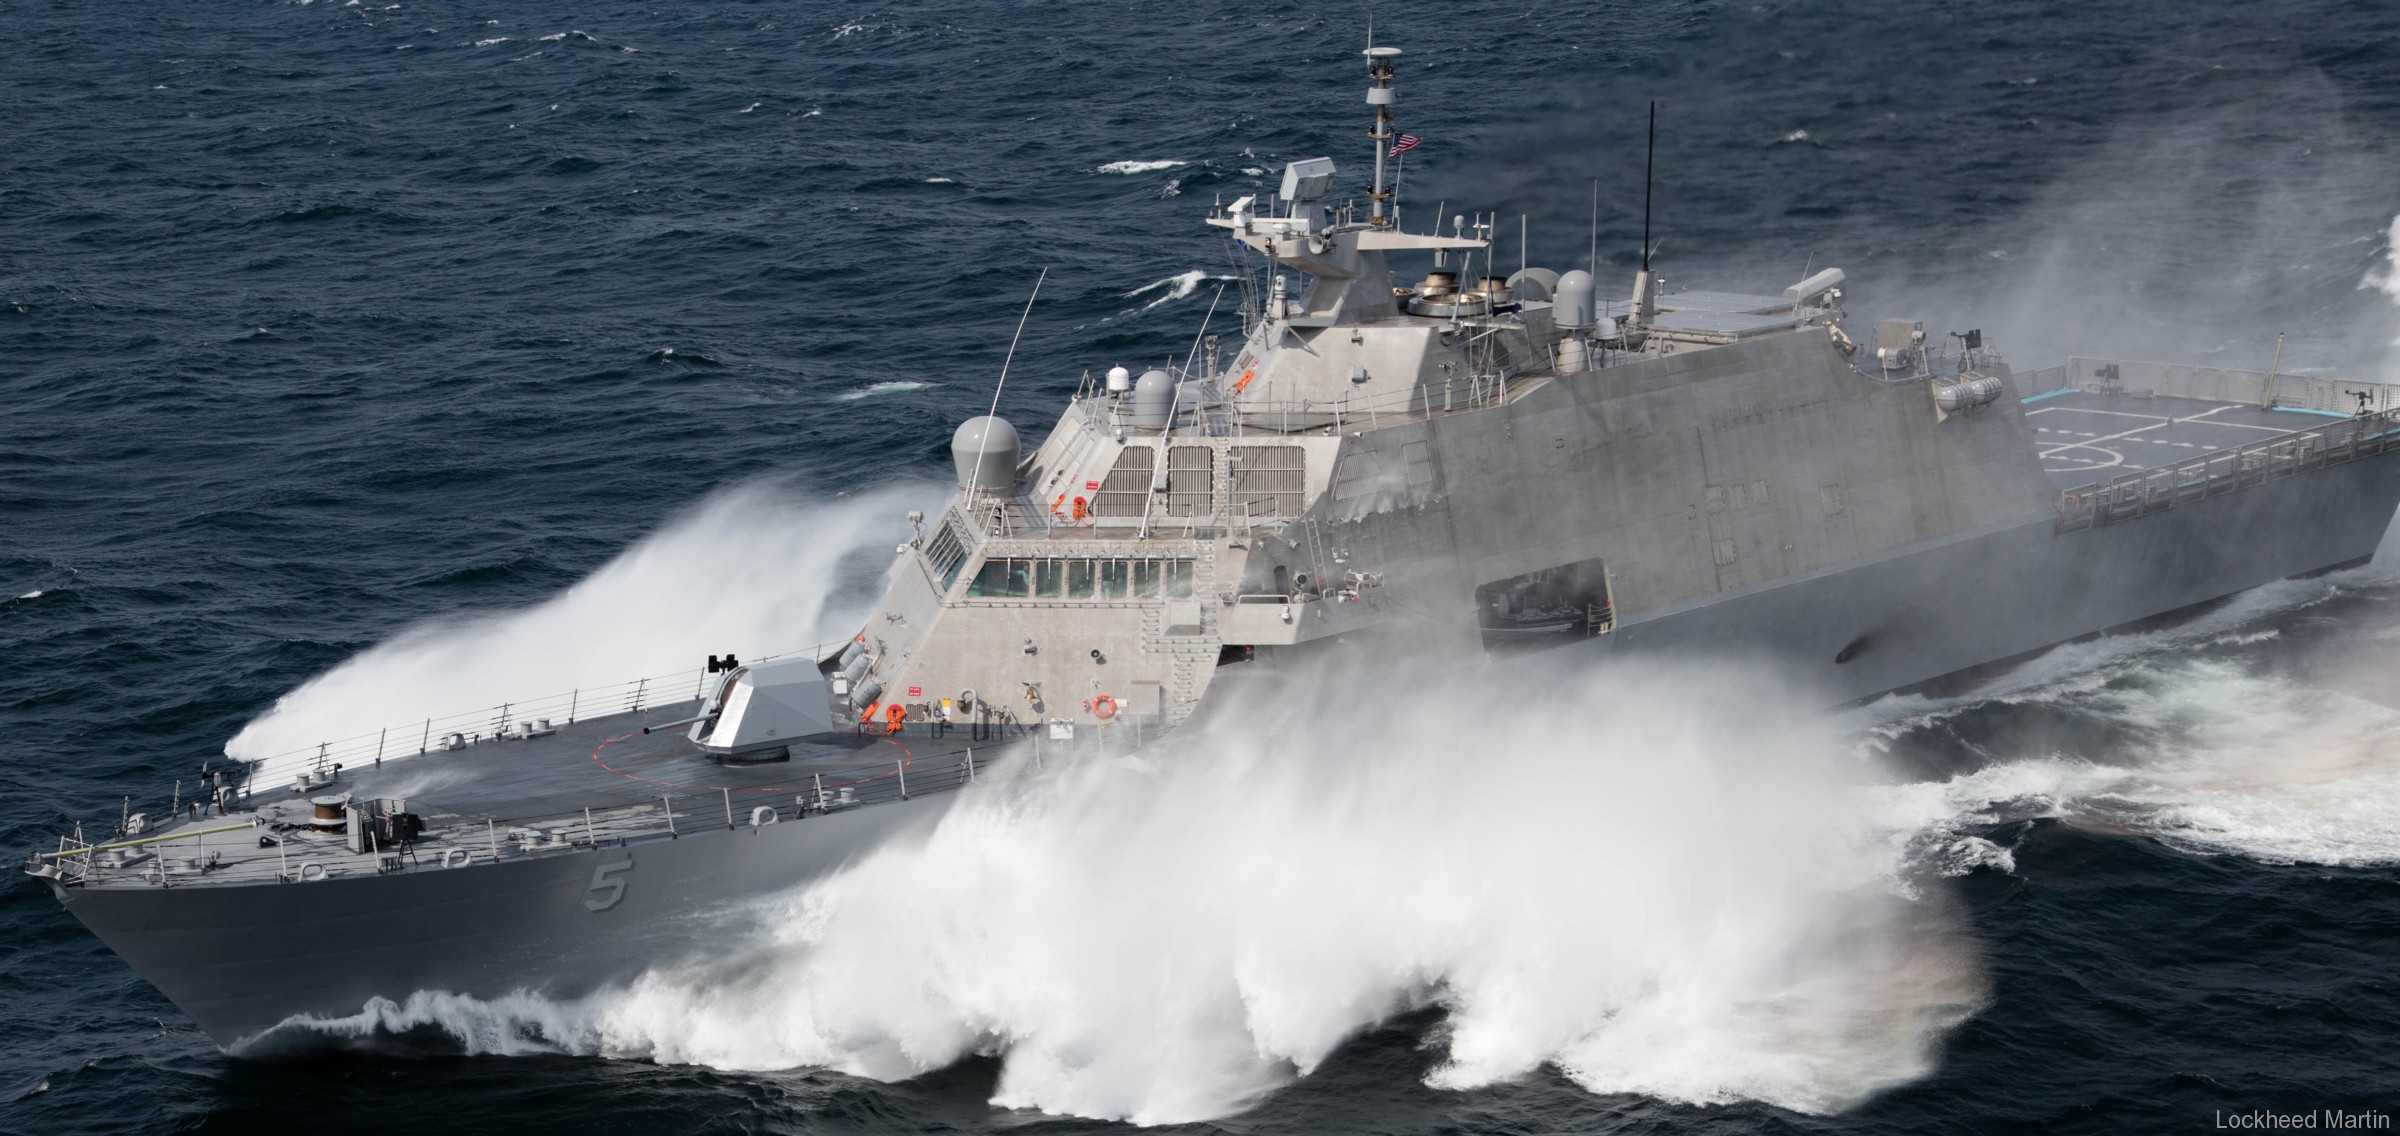 lcs-5 uss milwaukee freedom class littoral combat ship us navy 34 acceptance trials